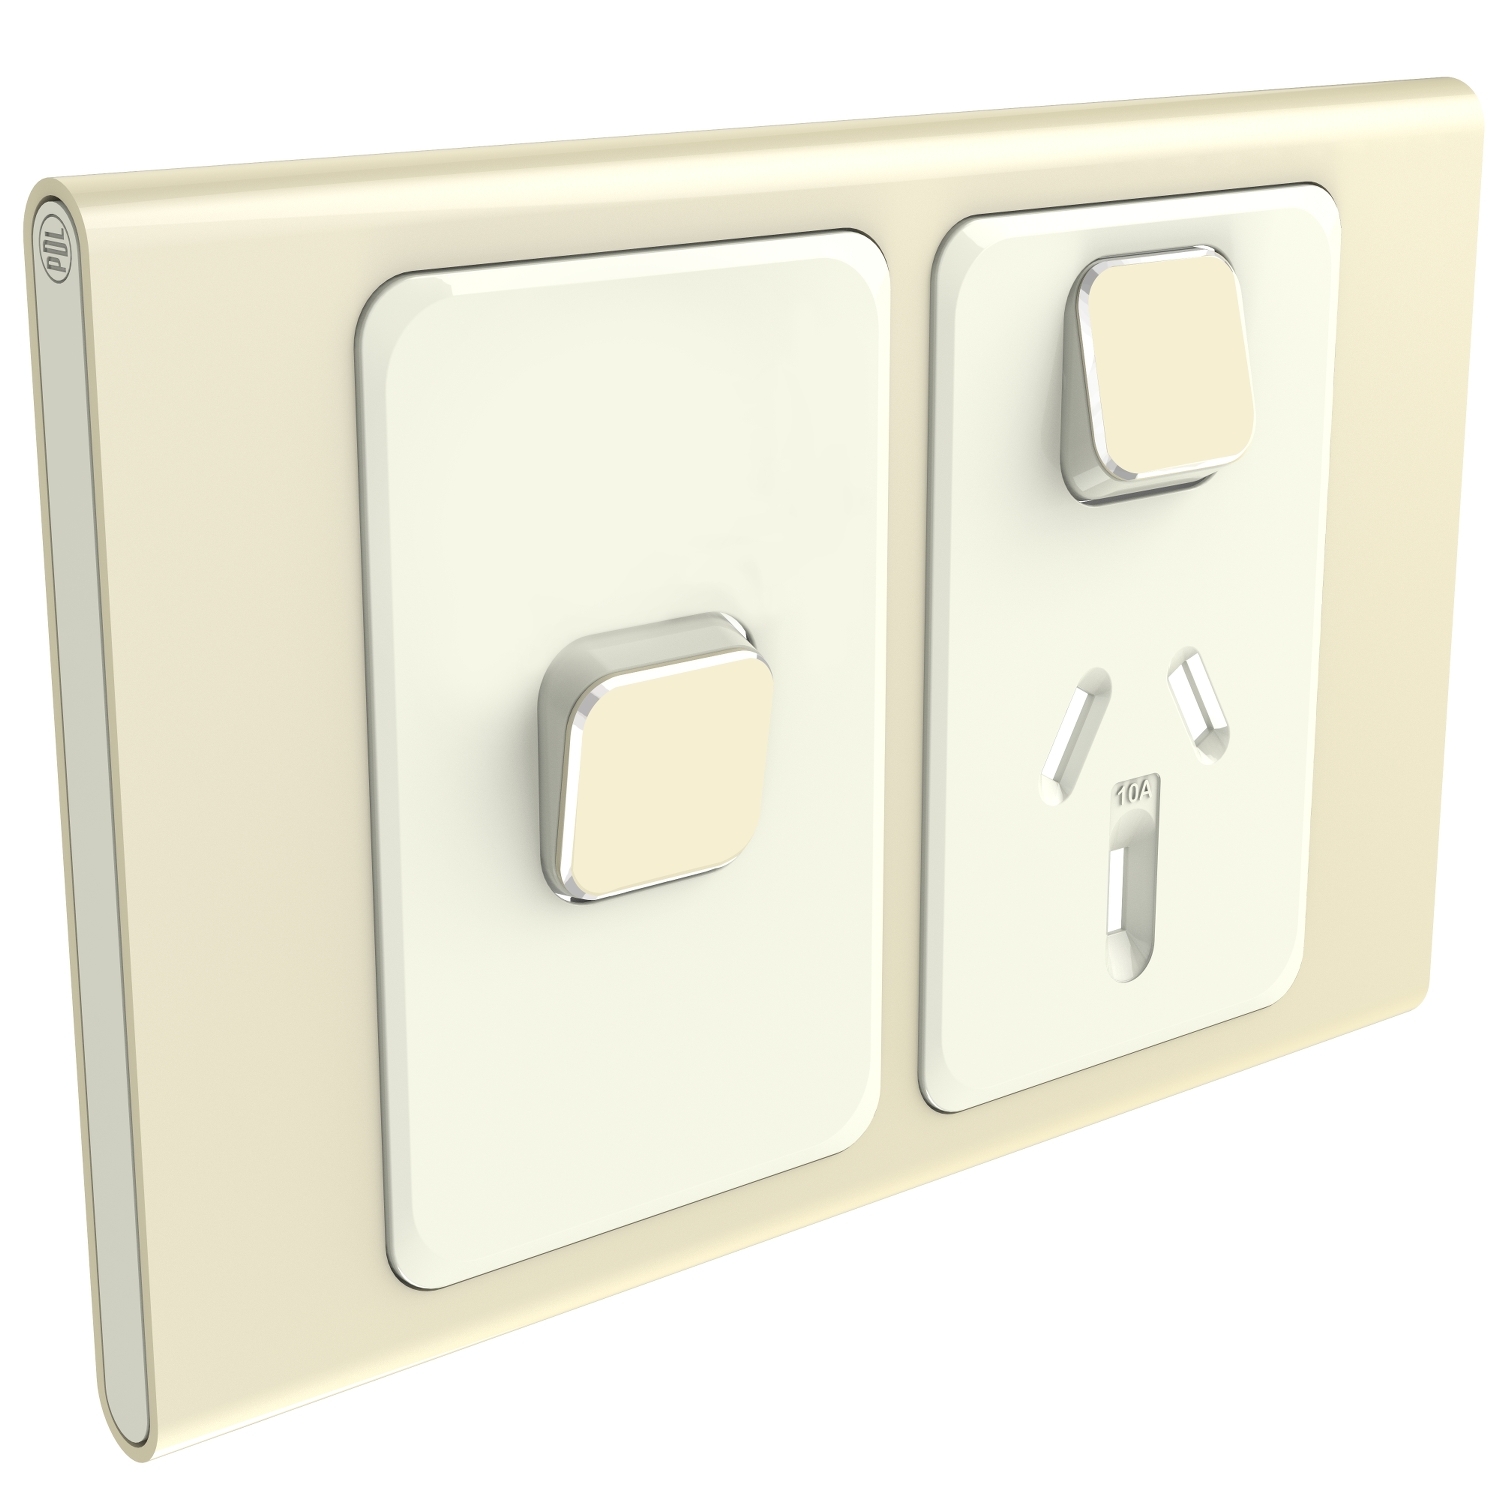 PDL Iconic Styl, cover frame, 2 switches & 1 socket, horizontal - Crowne